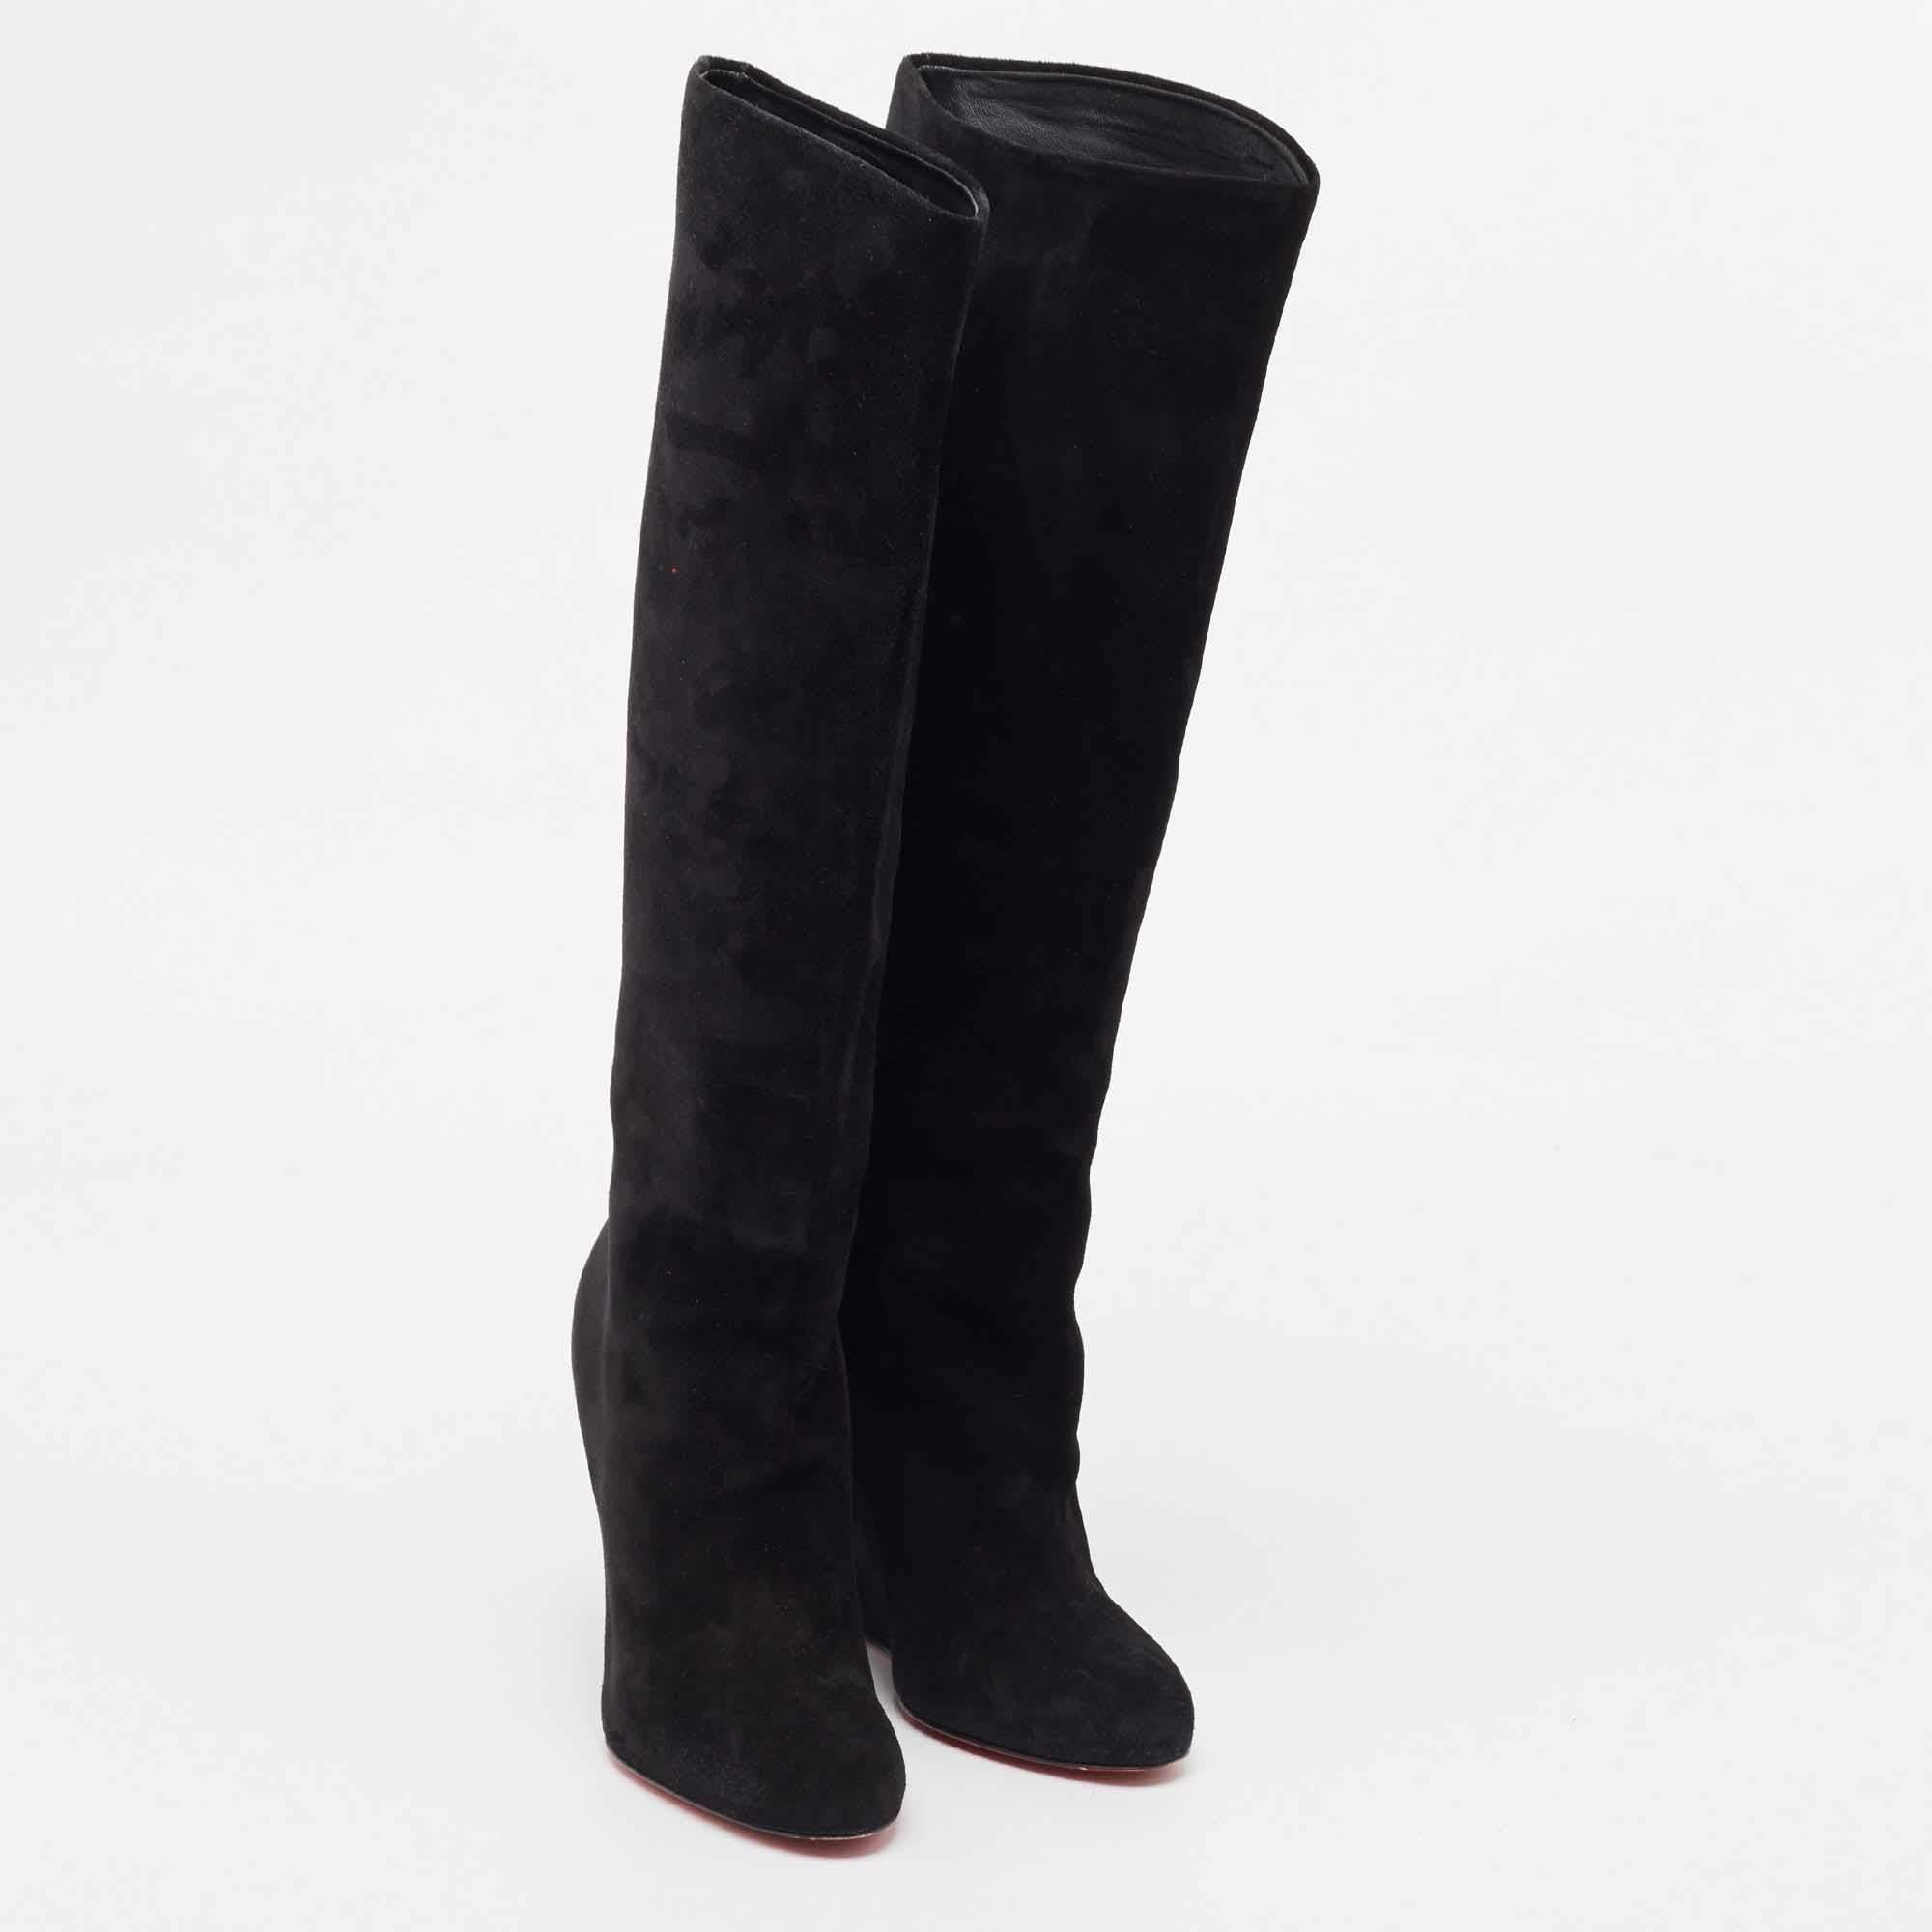 Christian Louboutin Black Suede Melissa Botta Wedge Knee Boots Size 37.5 For Sale 1